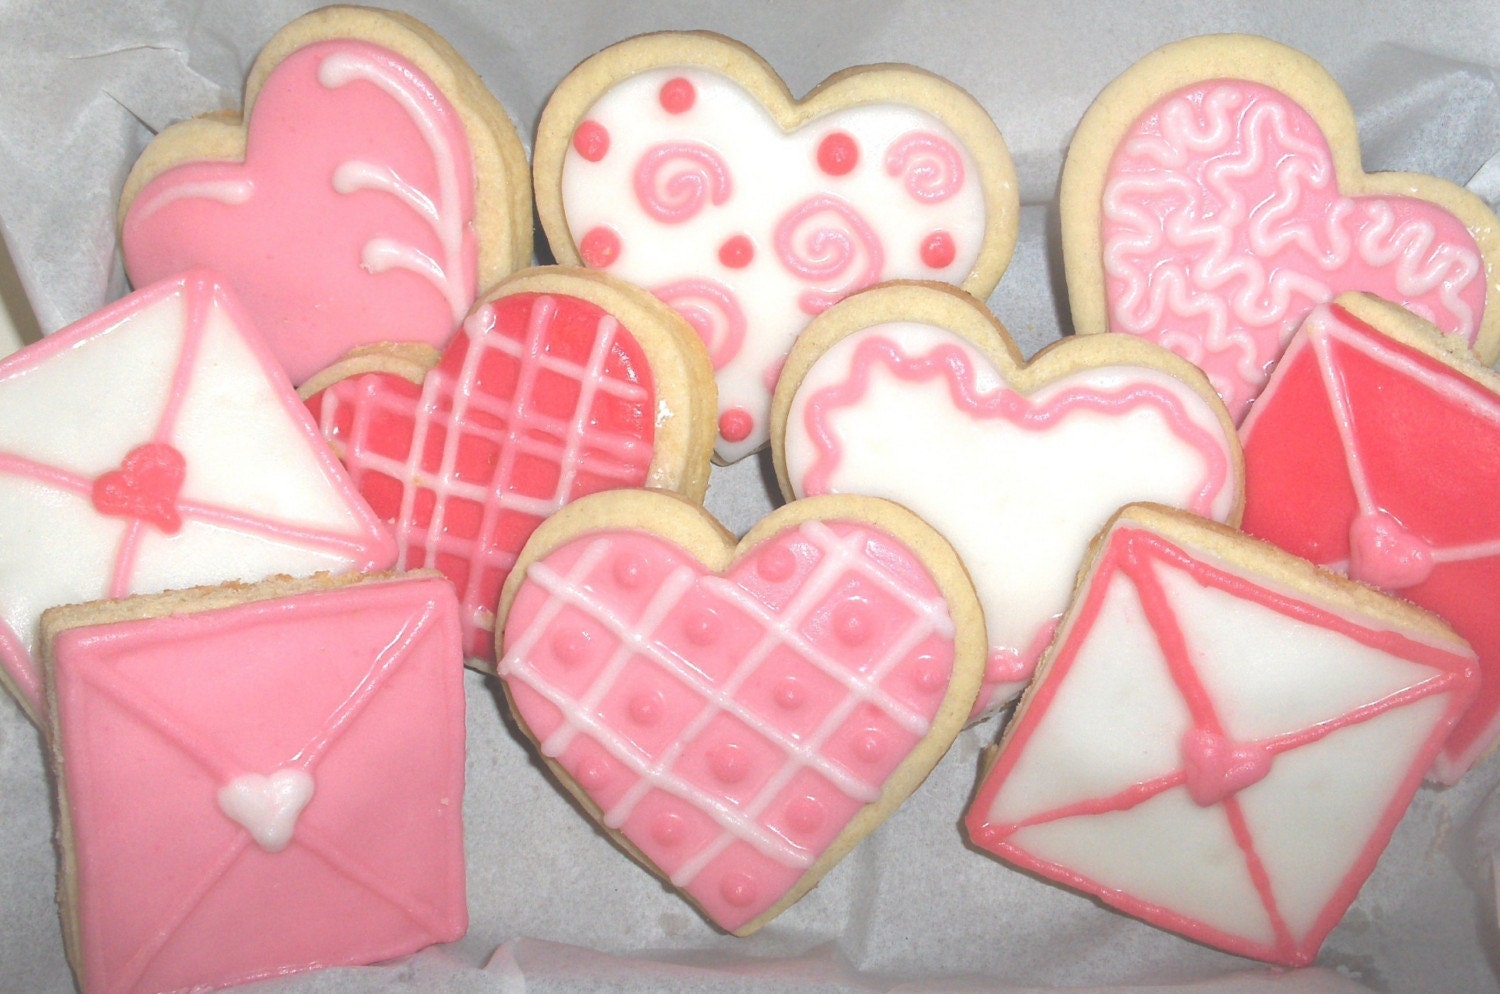 VALENTINE COOKIES-Decorated sugar cookie with rich Buttercream frosting-Hearts and letters